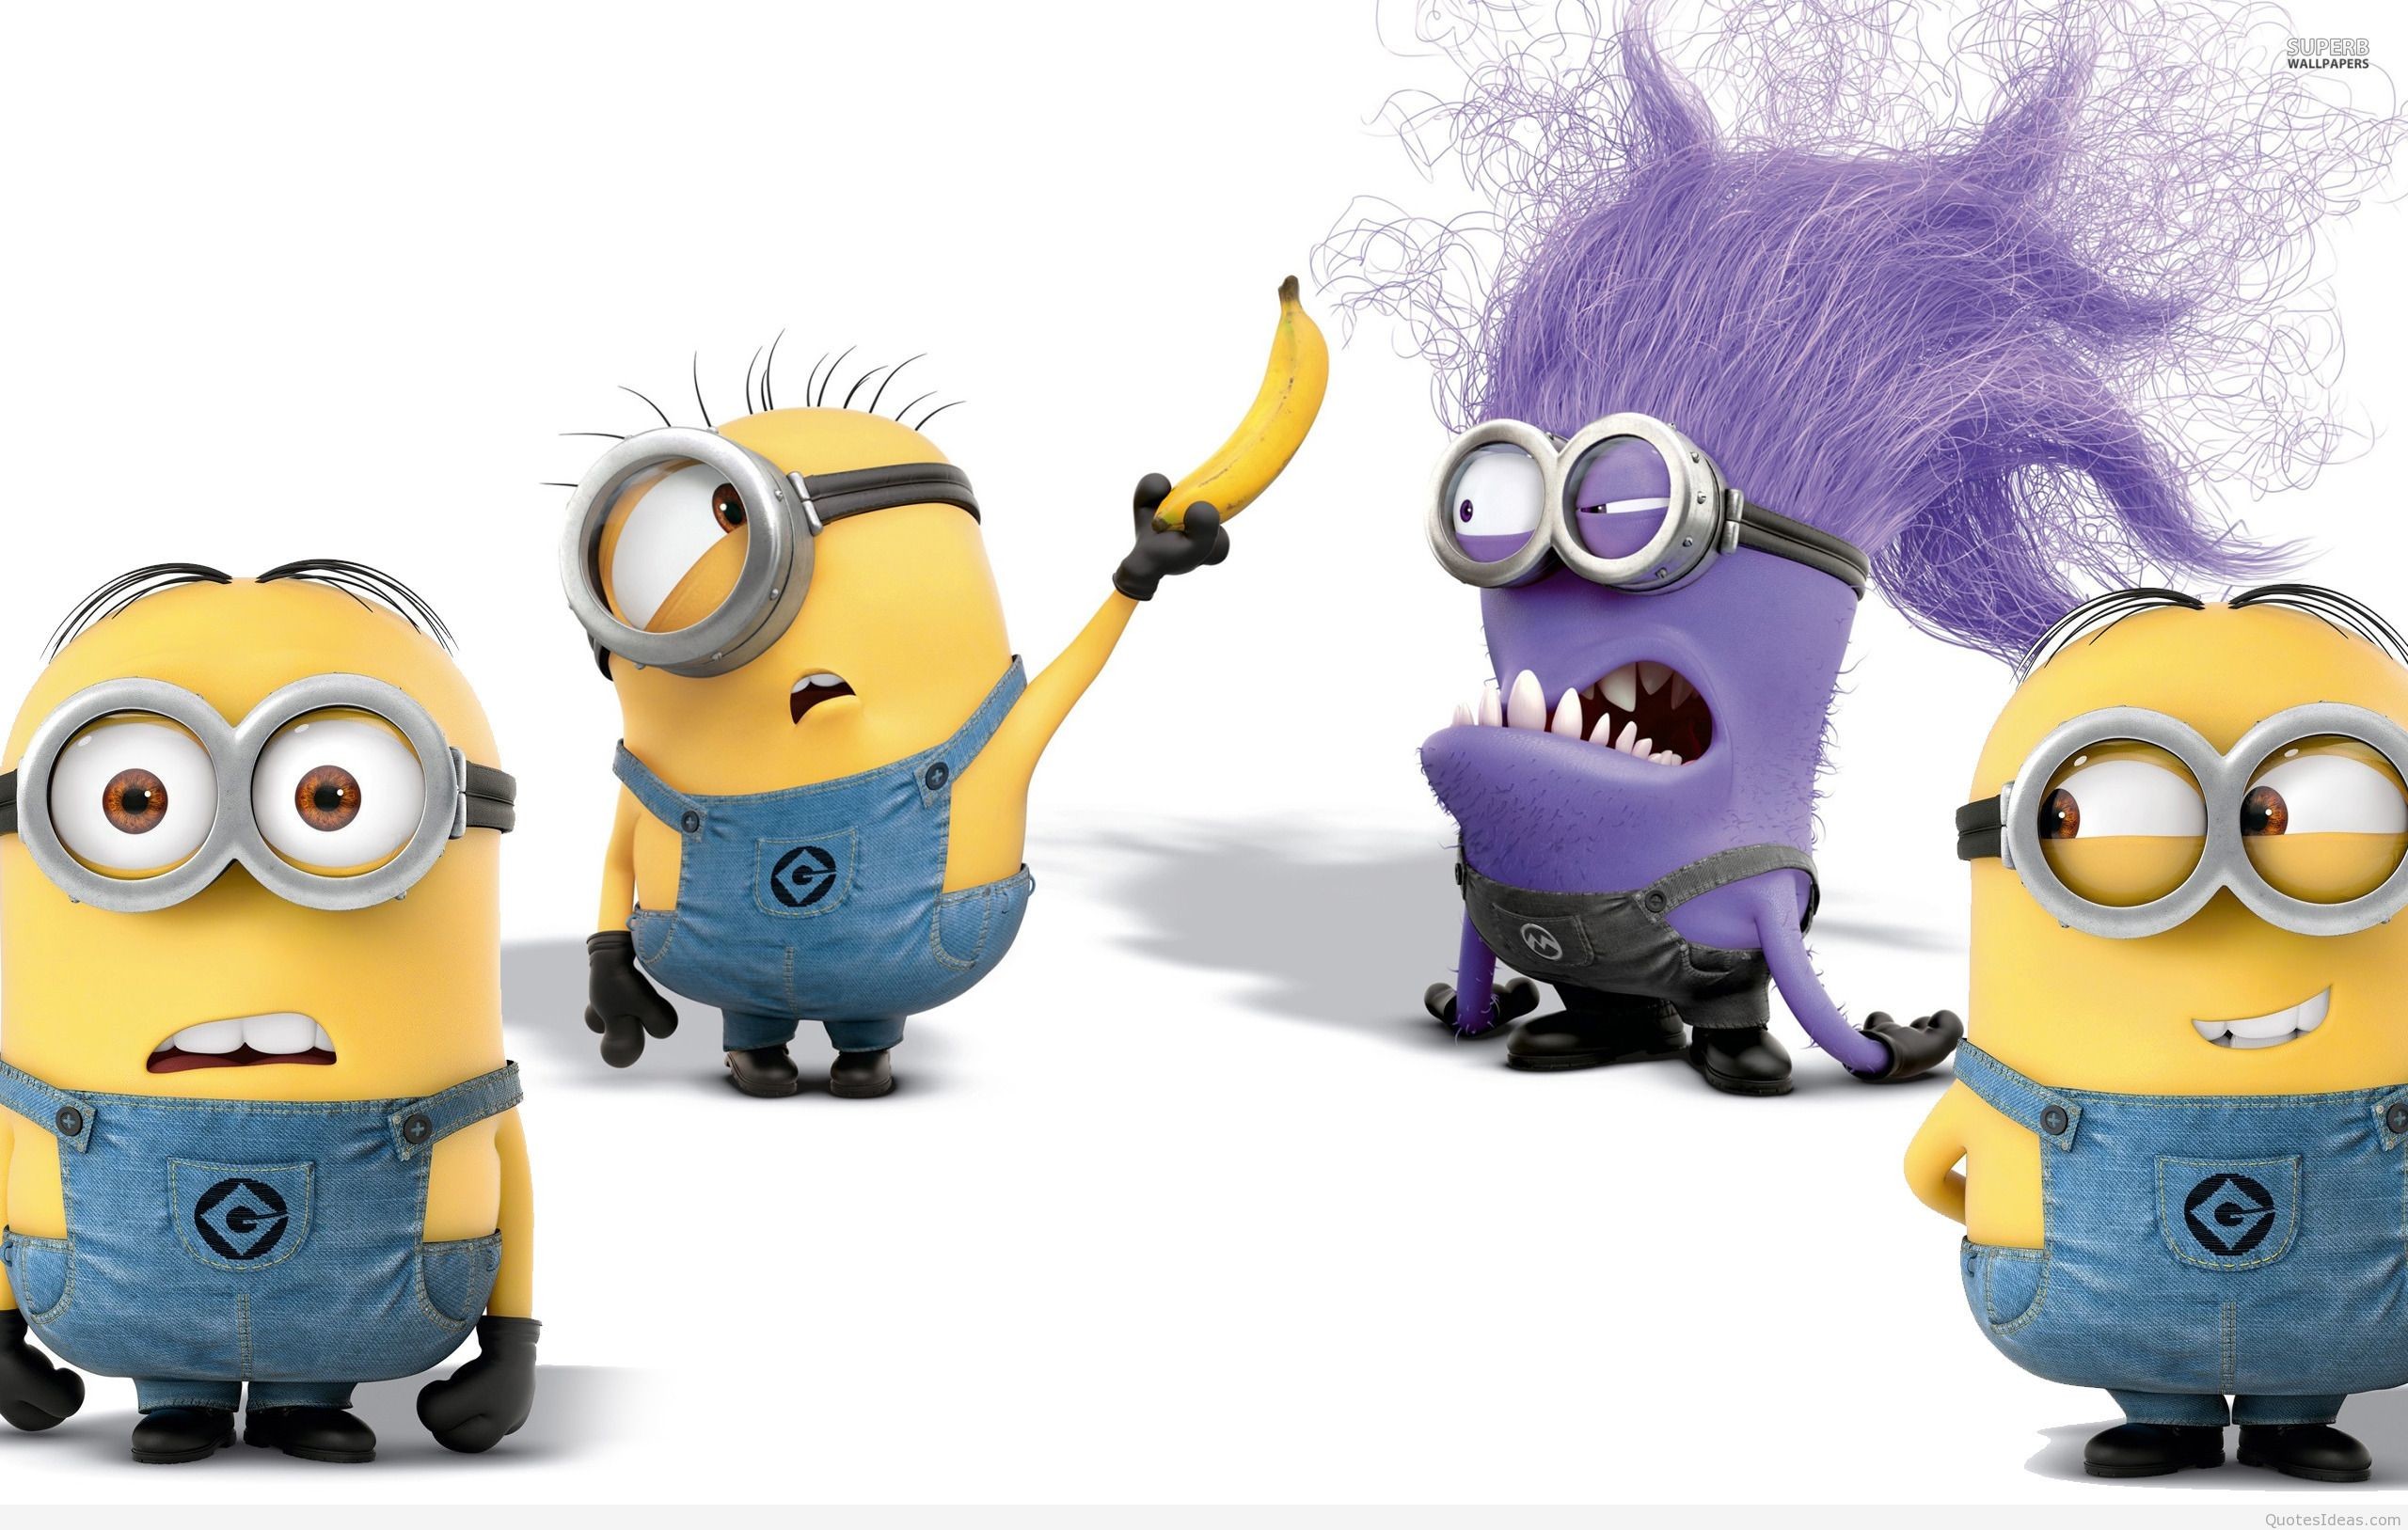 2560x1627 ... minions-despicable-me-2-wallpapers-funny-movie-images- ...